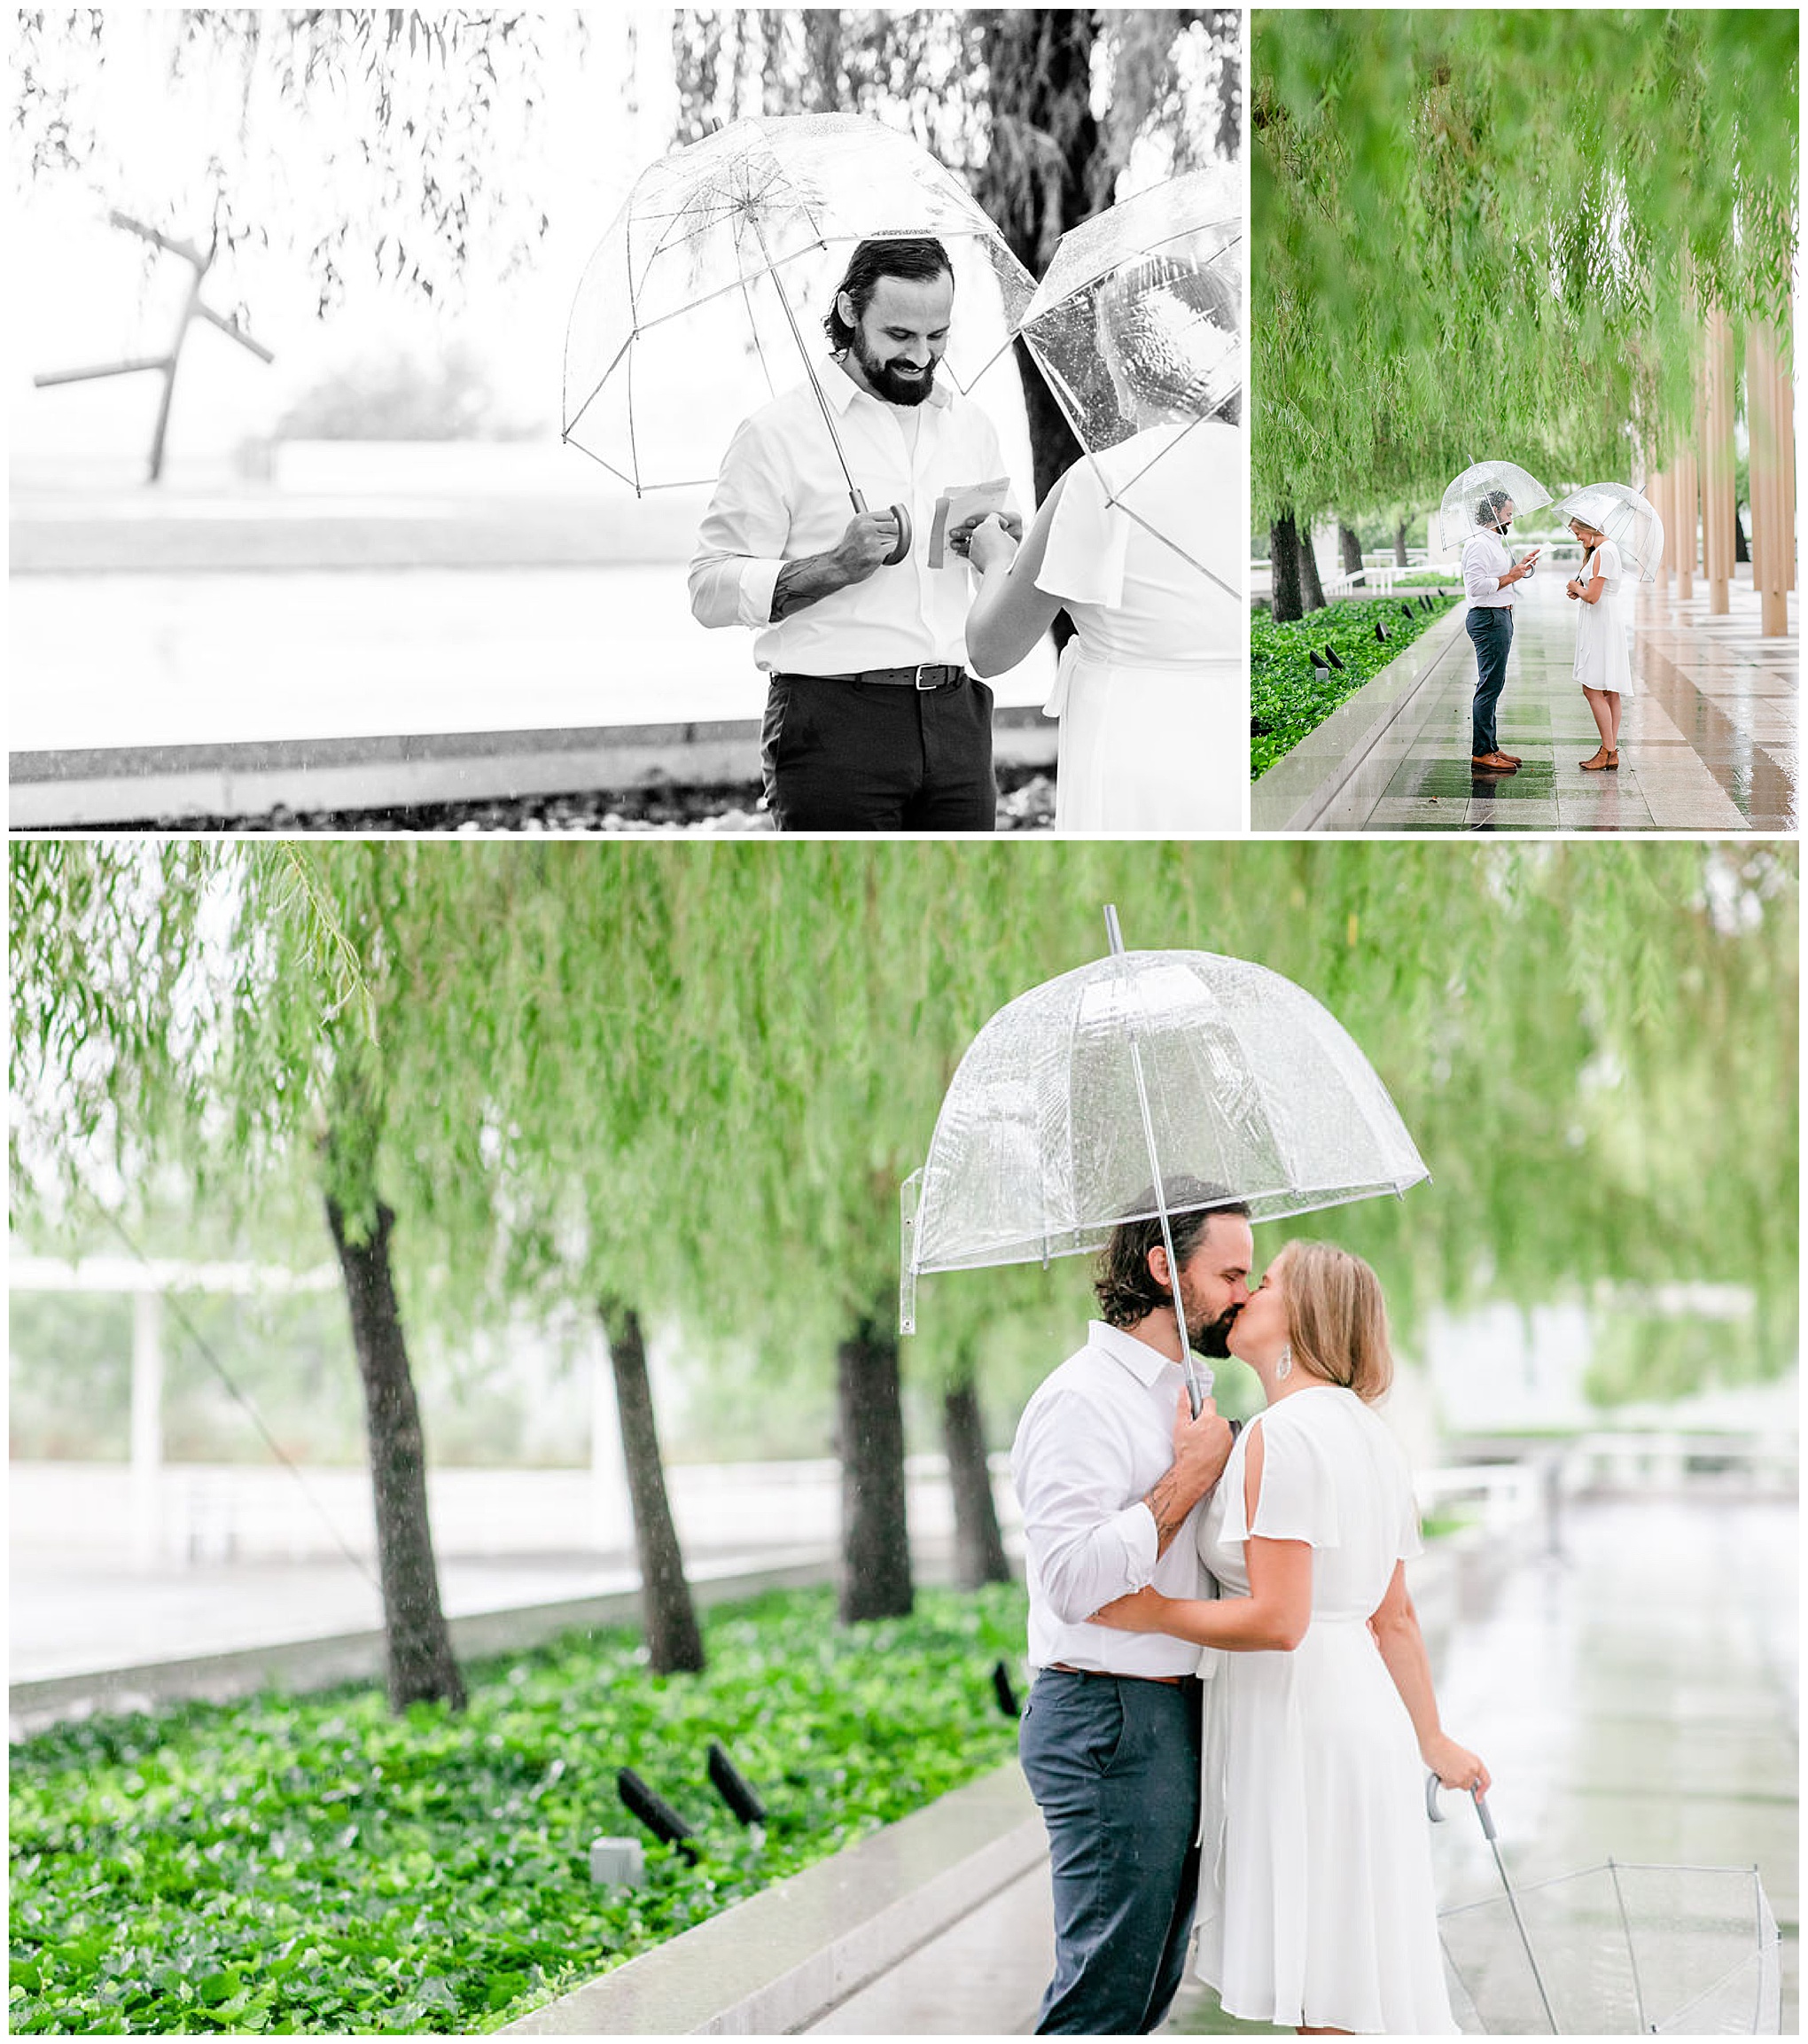 rainy Kennedy Center elopement, DC elopement, rainy day portraits, rainy elopement, rainy engagement photos, playing in the rain, Washington DC wedding photographer, DC wedding photography, playful portraits, boho couple, dancing in the rain, Rachel E.H. Photography, black and white, couple reading vows, couple kissing under umbrella